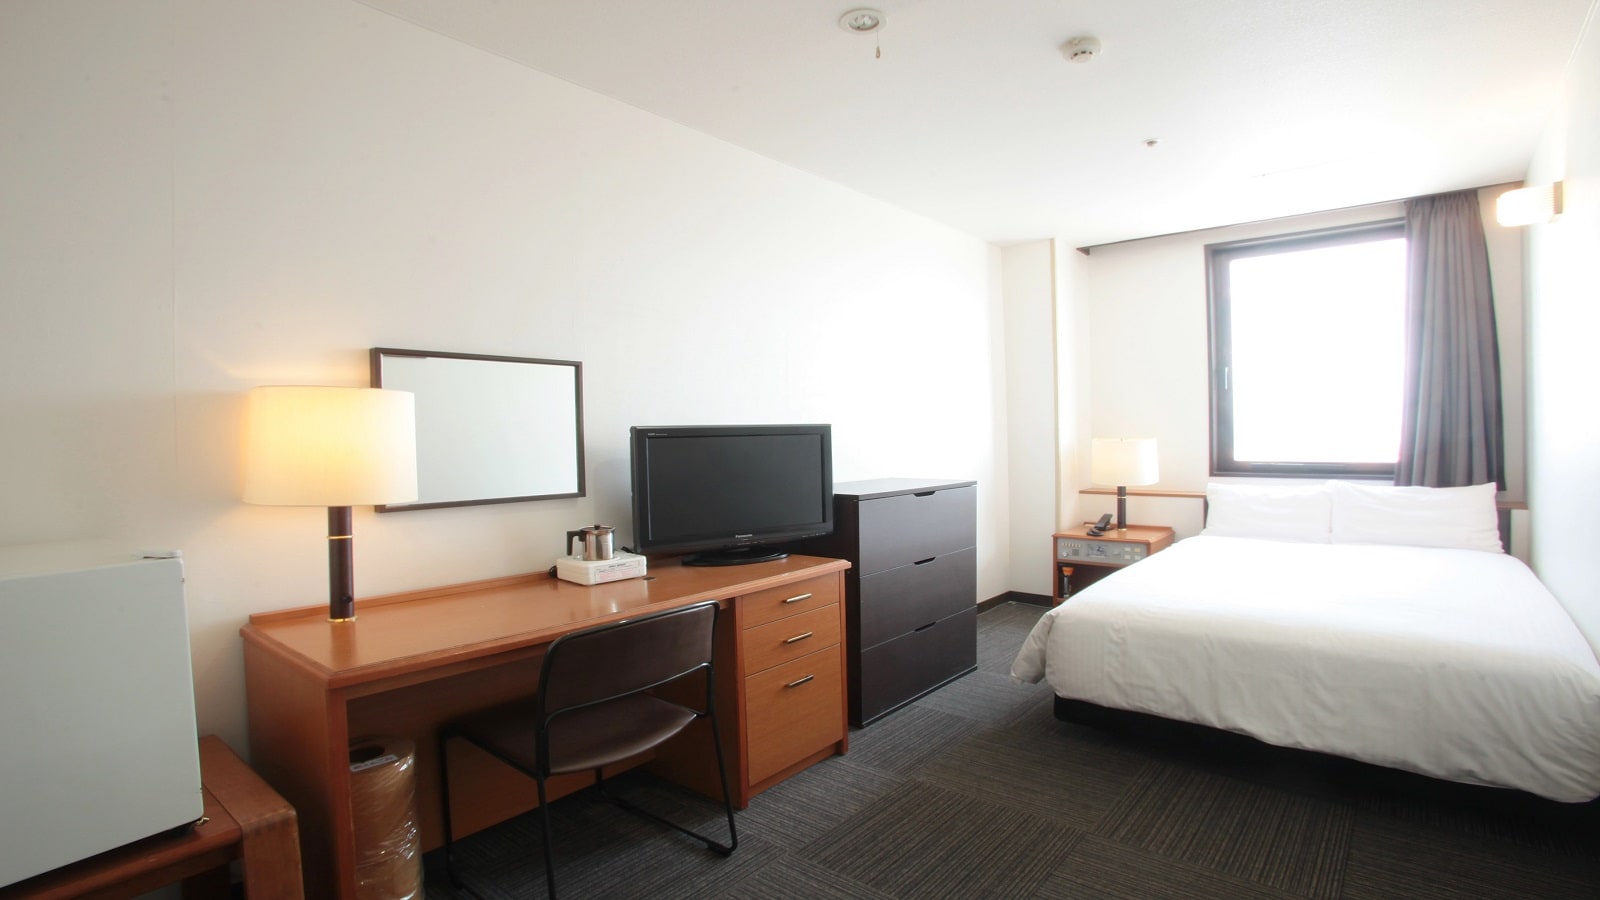 ■ Semi-double room ■ Spacious 17.6㎡ ～ / Bed width 120cm